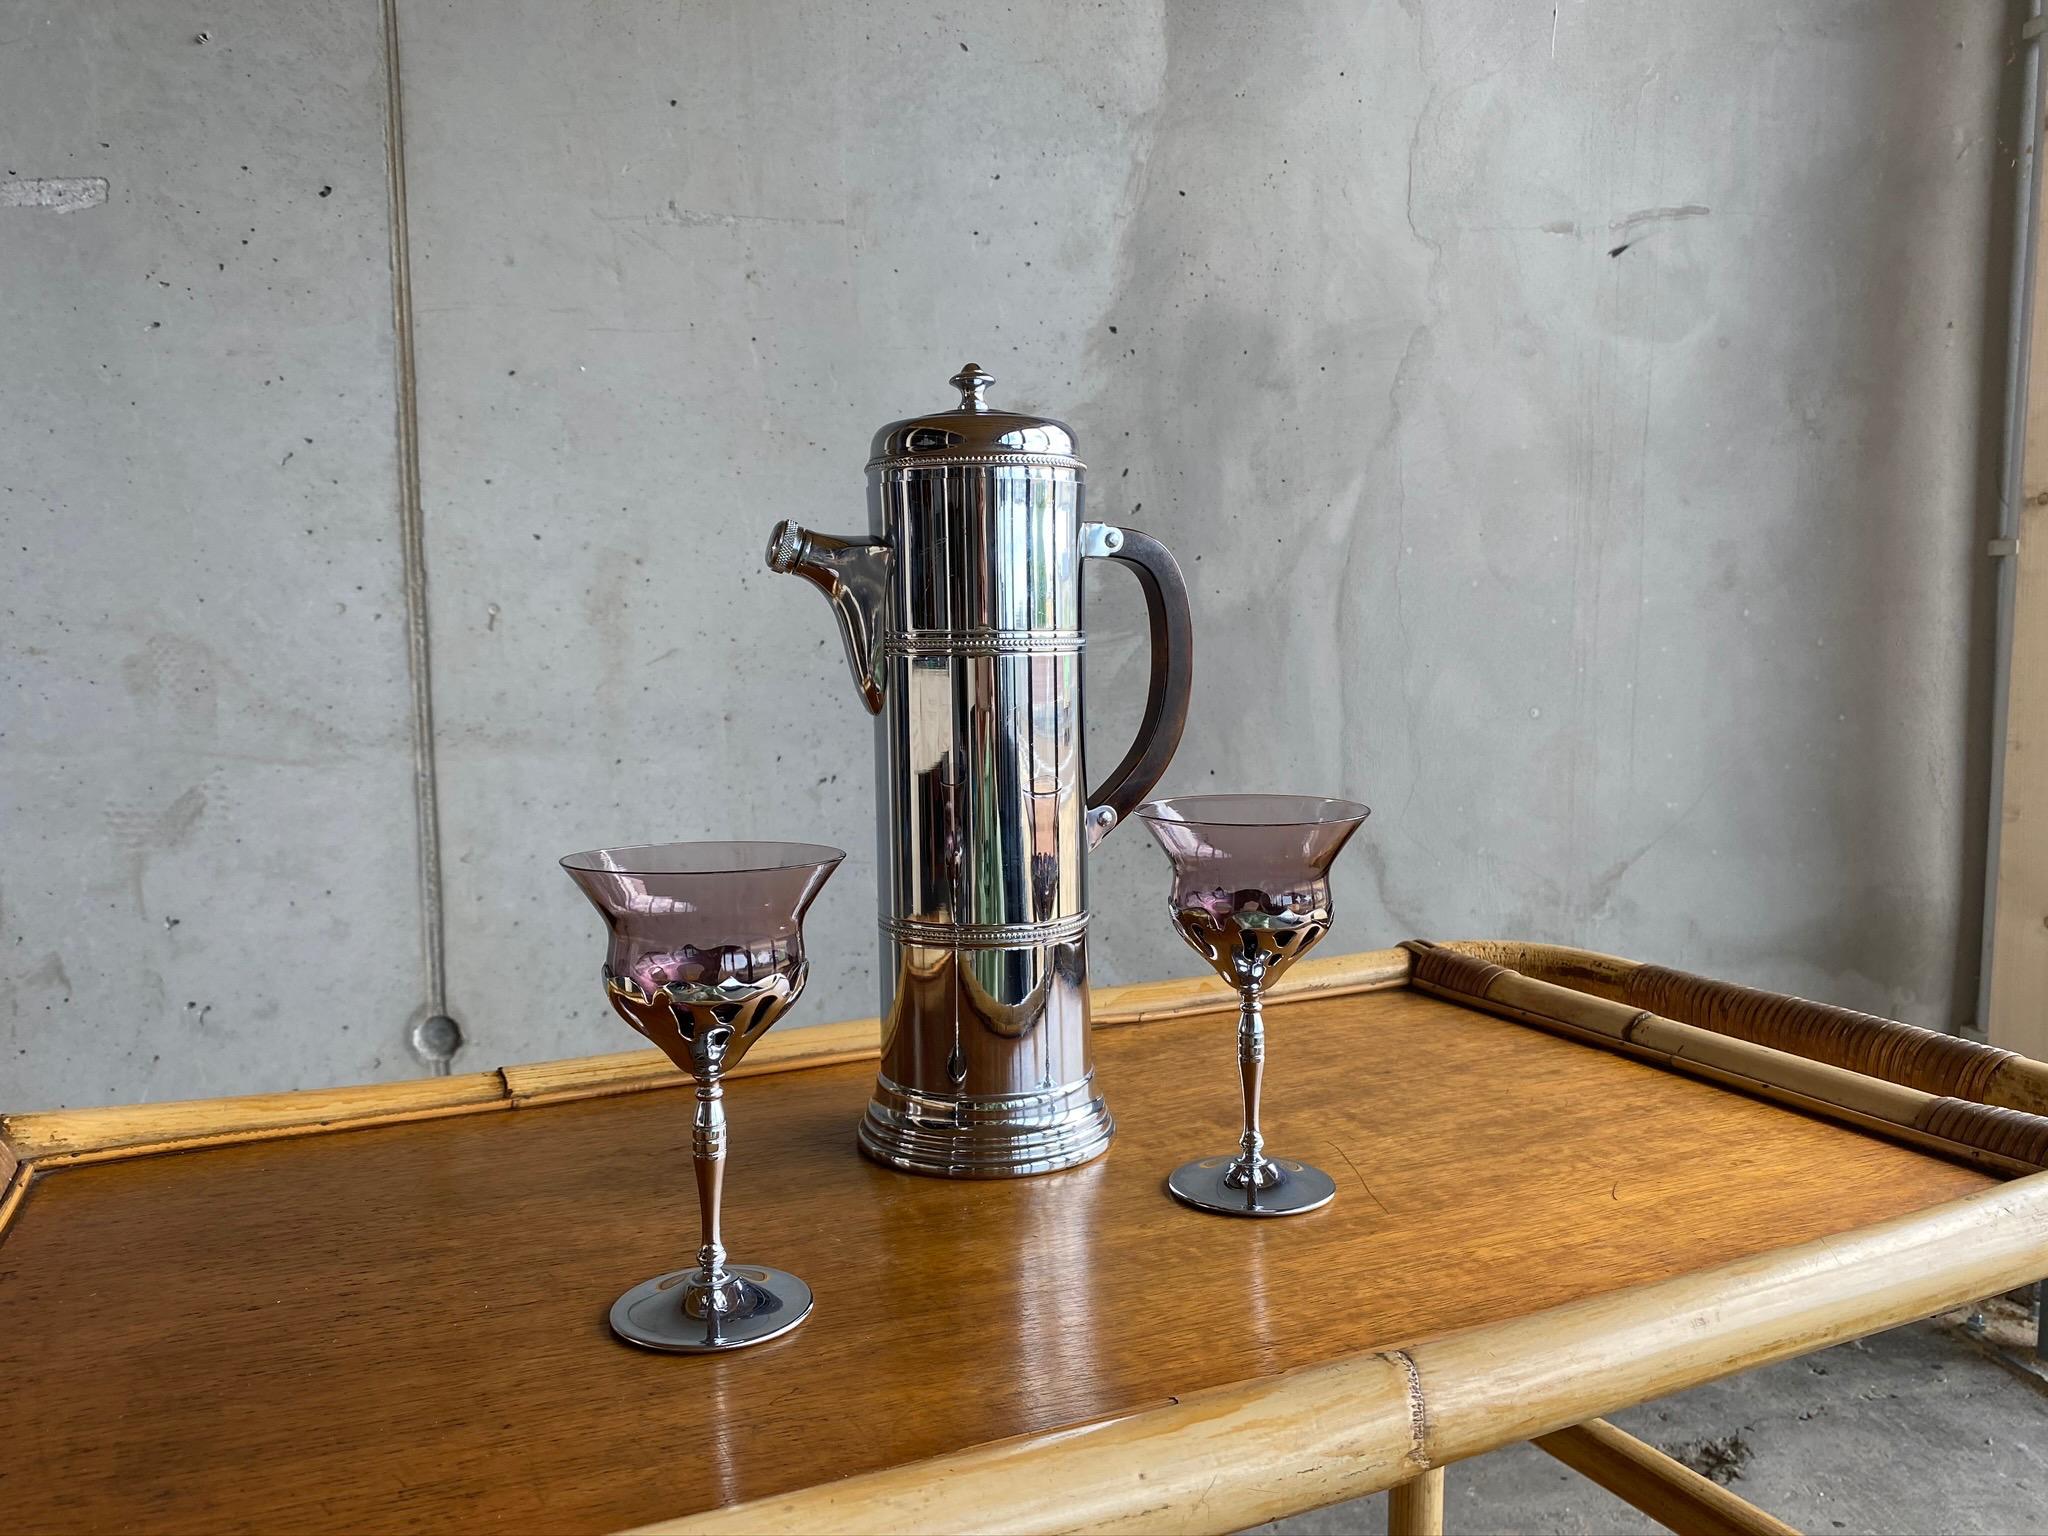 American Rare Art Deco Bauhaus Shaker from the 1930s with 2 Matching Cocktail Glasses